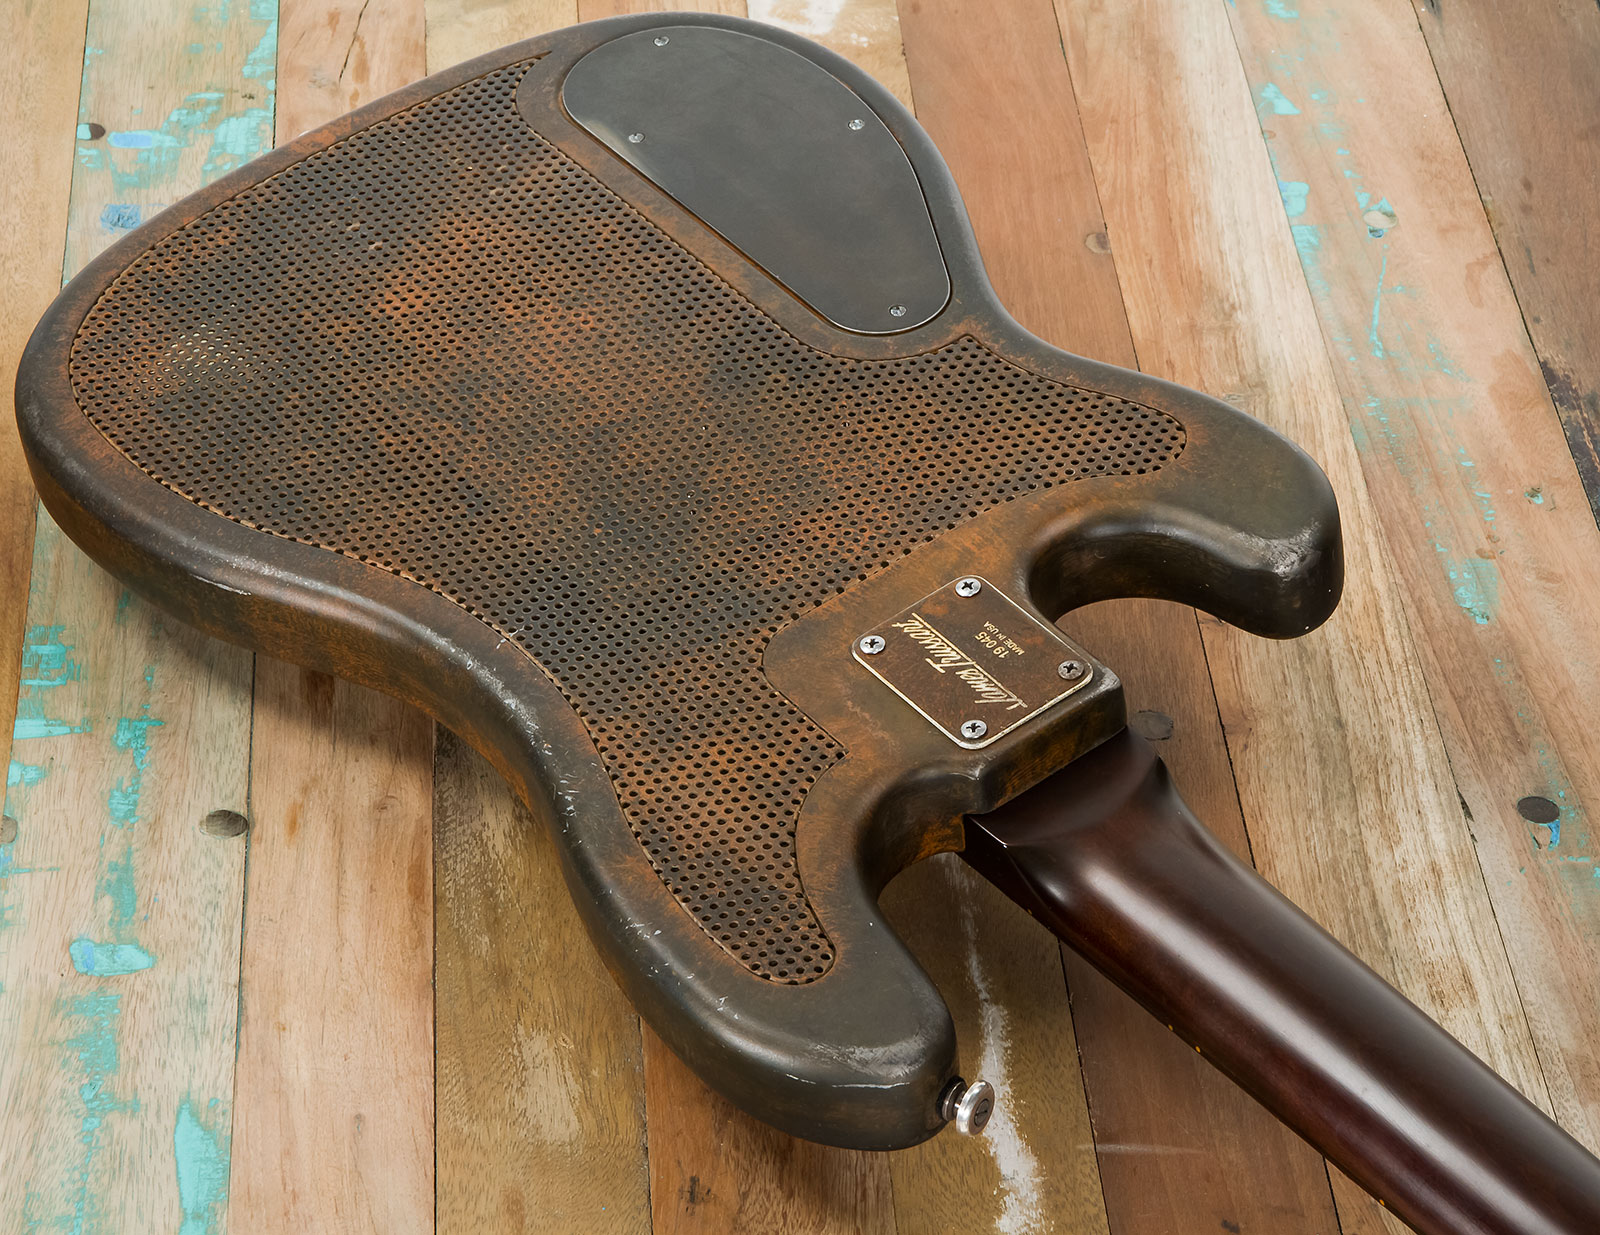 James Trussart Steelcaster Bass Perforated Active Pf #19045 - Rust O Matic African Engraved - Solidbody E-bass - Variation 3